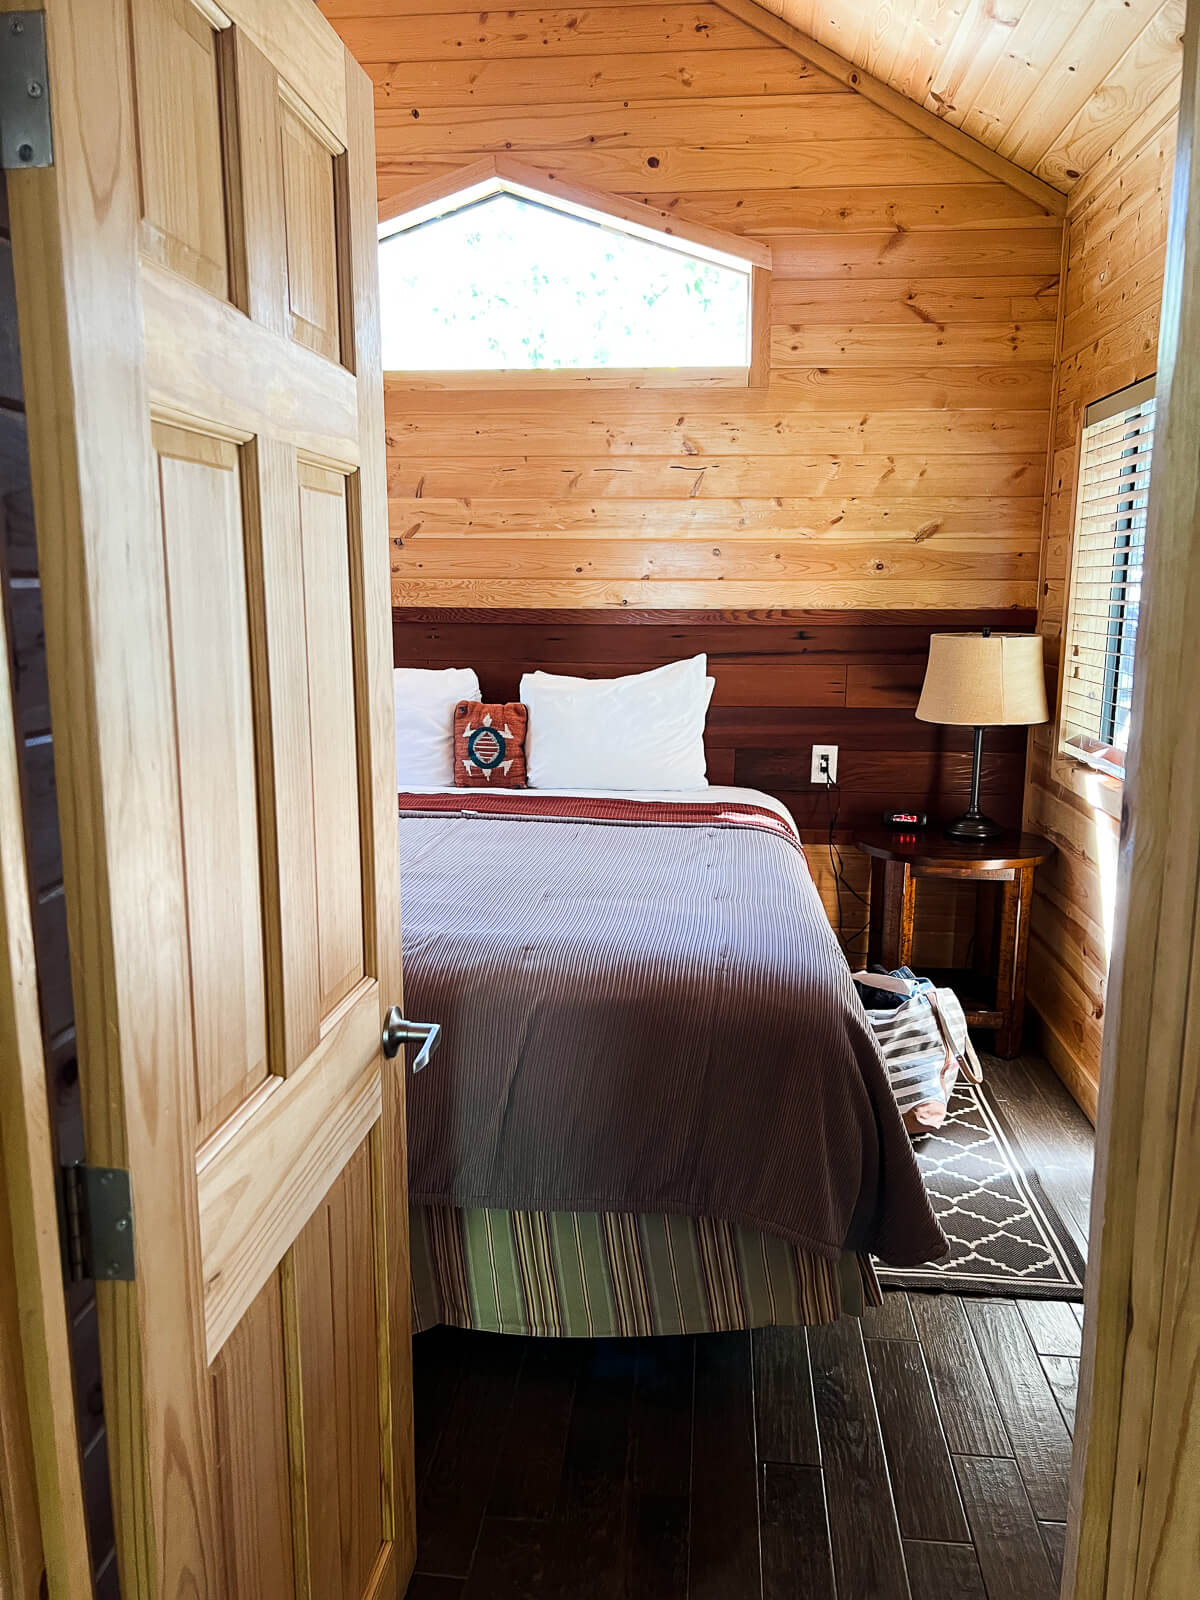 A look into the private bedroom at the El Capitan Canyon resort. 